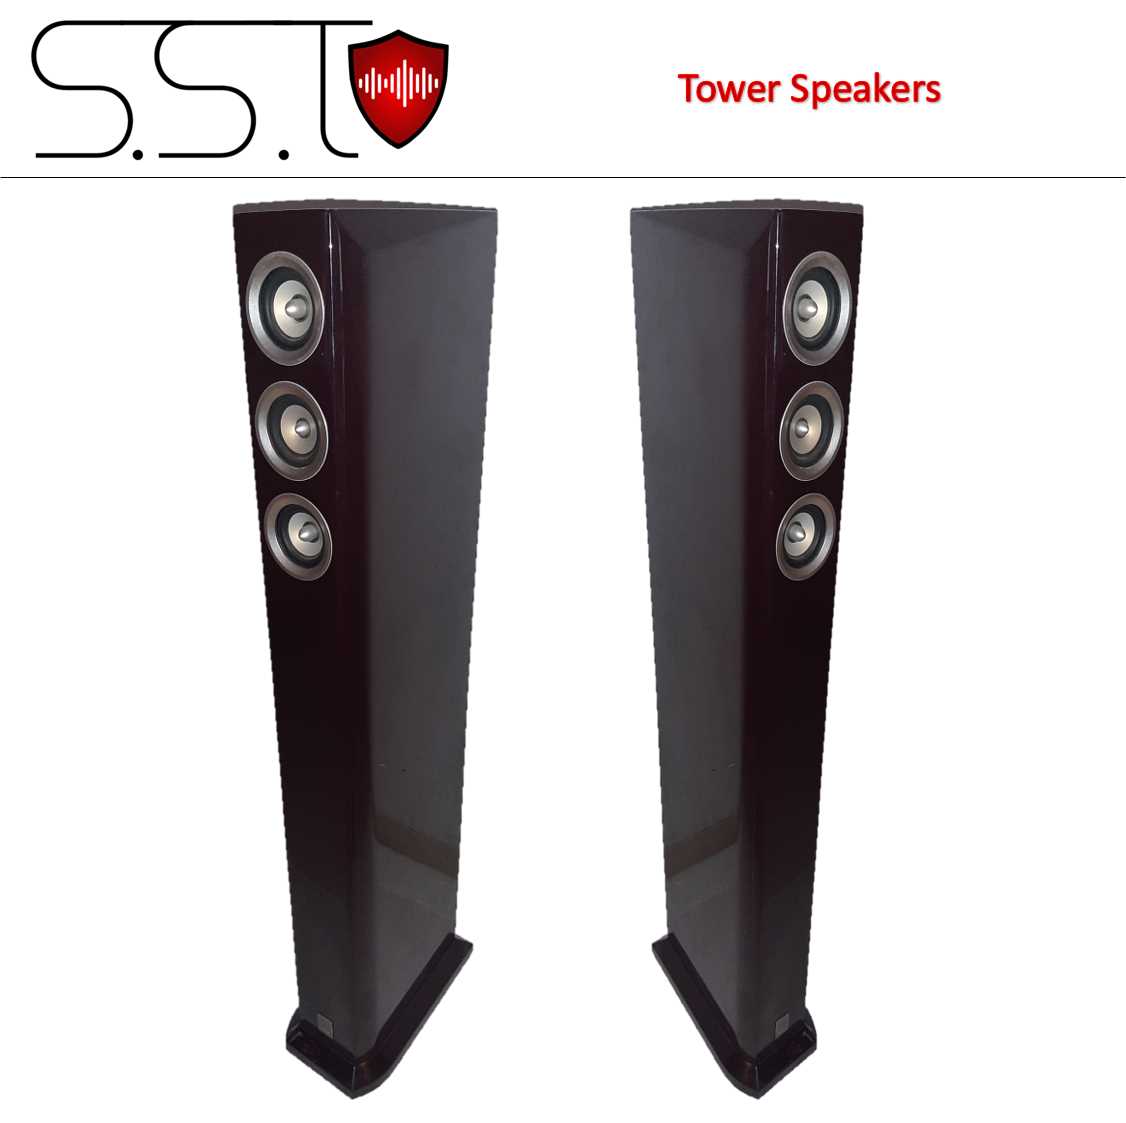 Linkman Tower Speakers for Sale sound and safety technologies